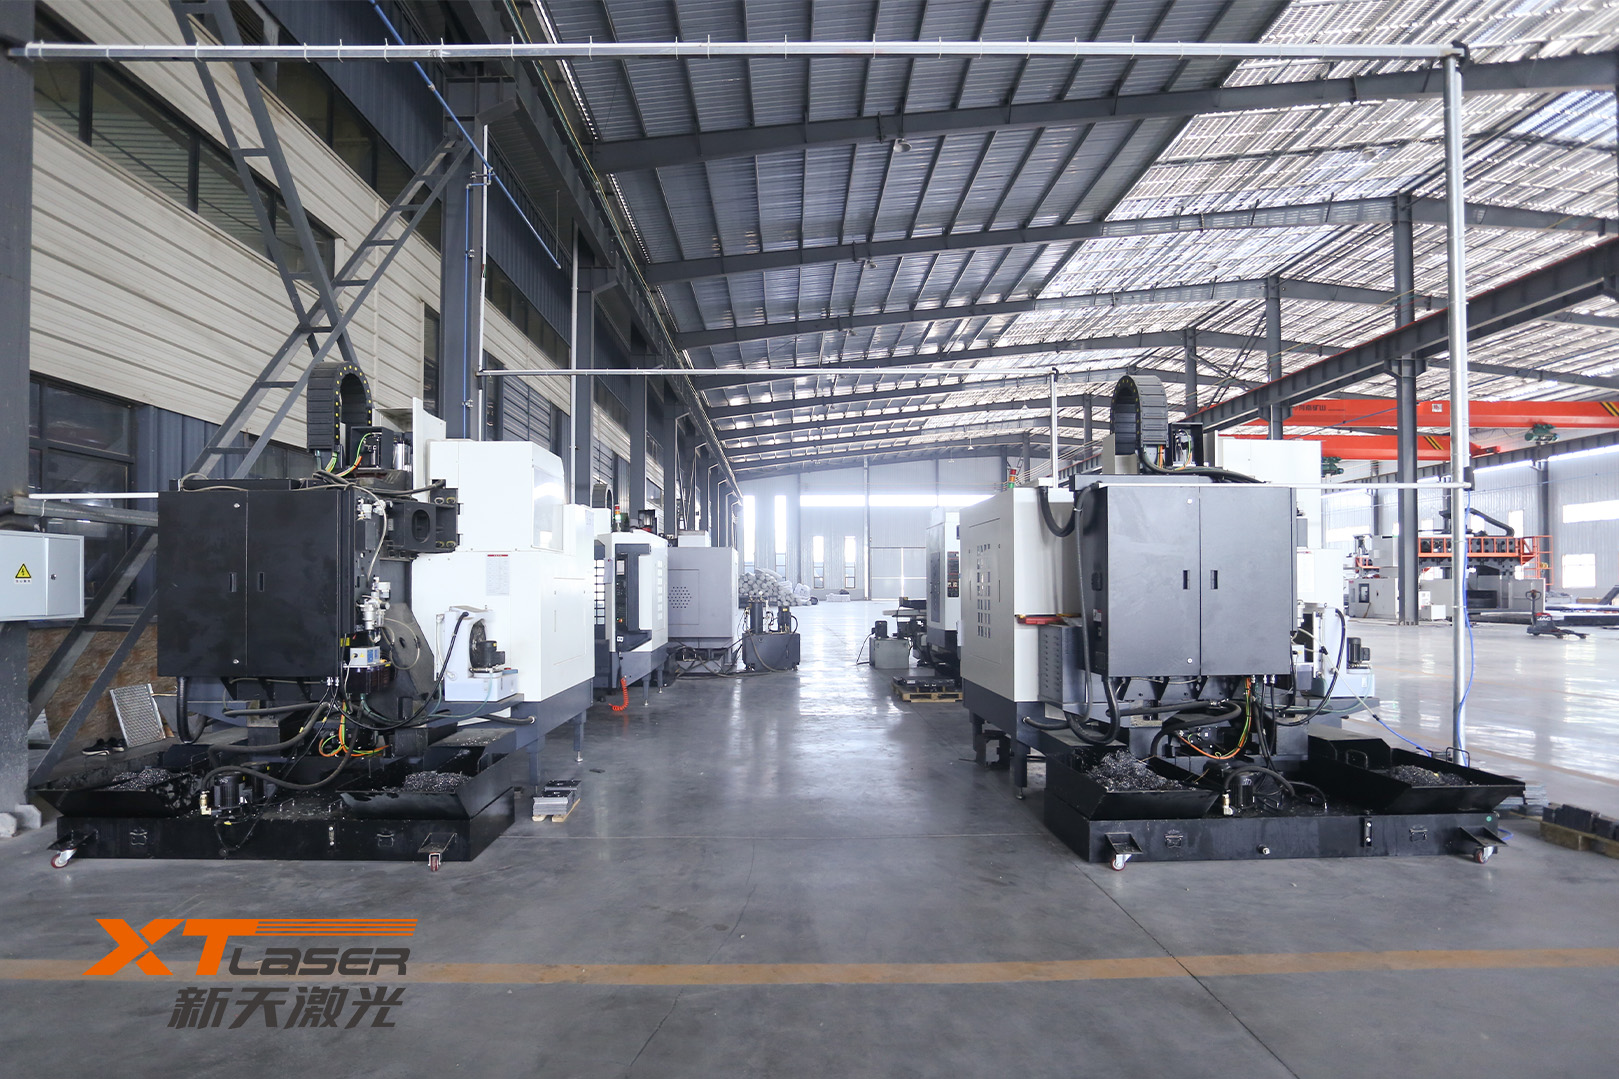 Which is the best equipment for fiber laser cutting machine